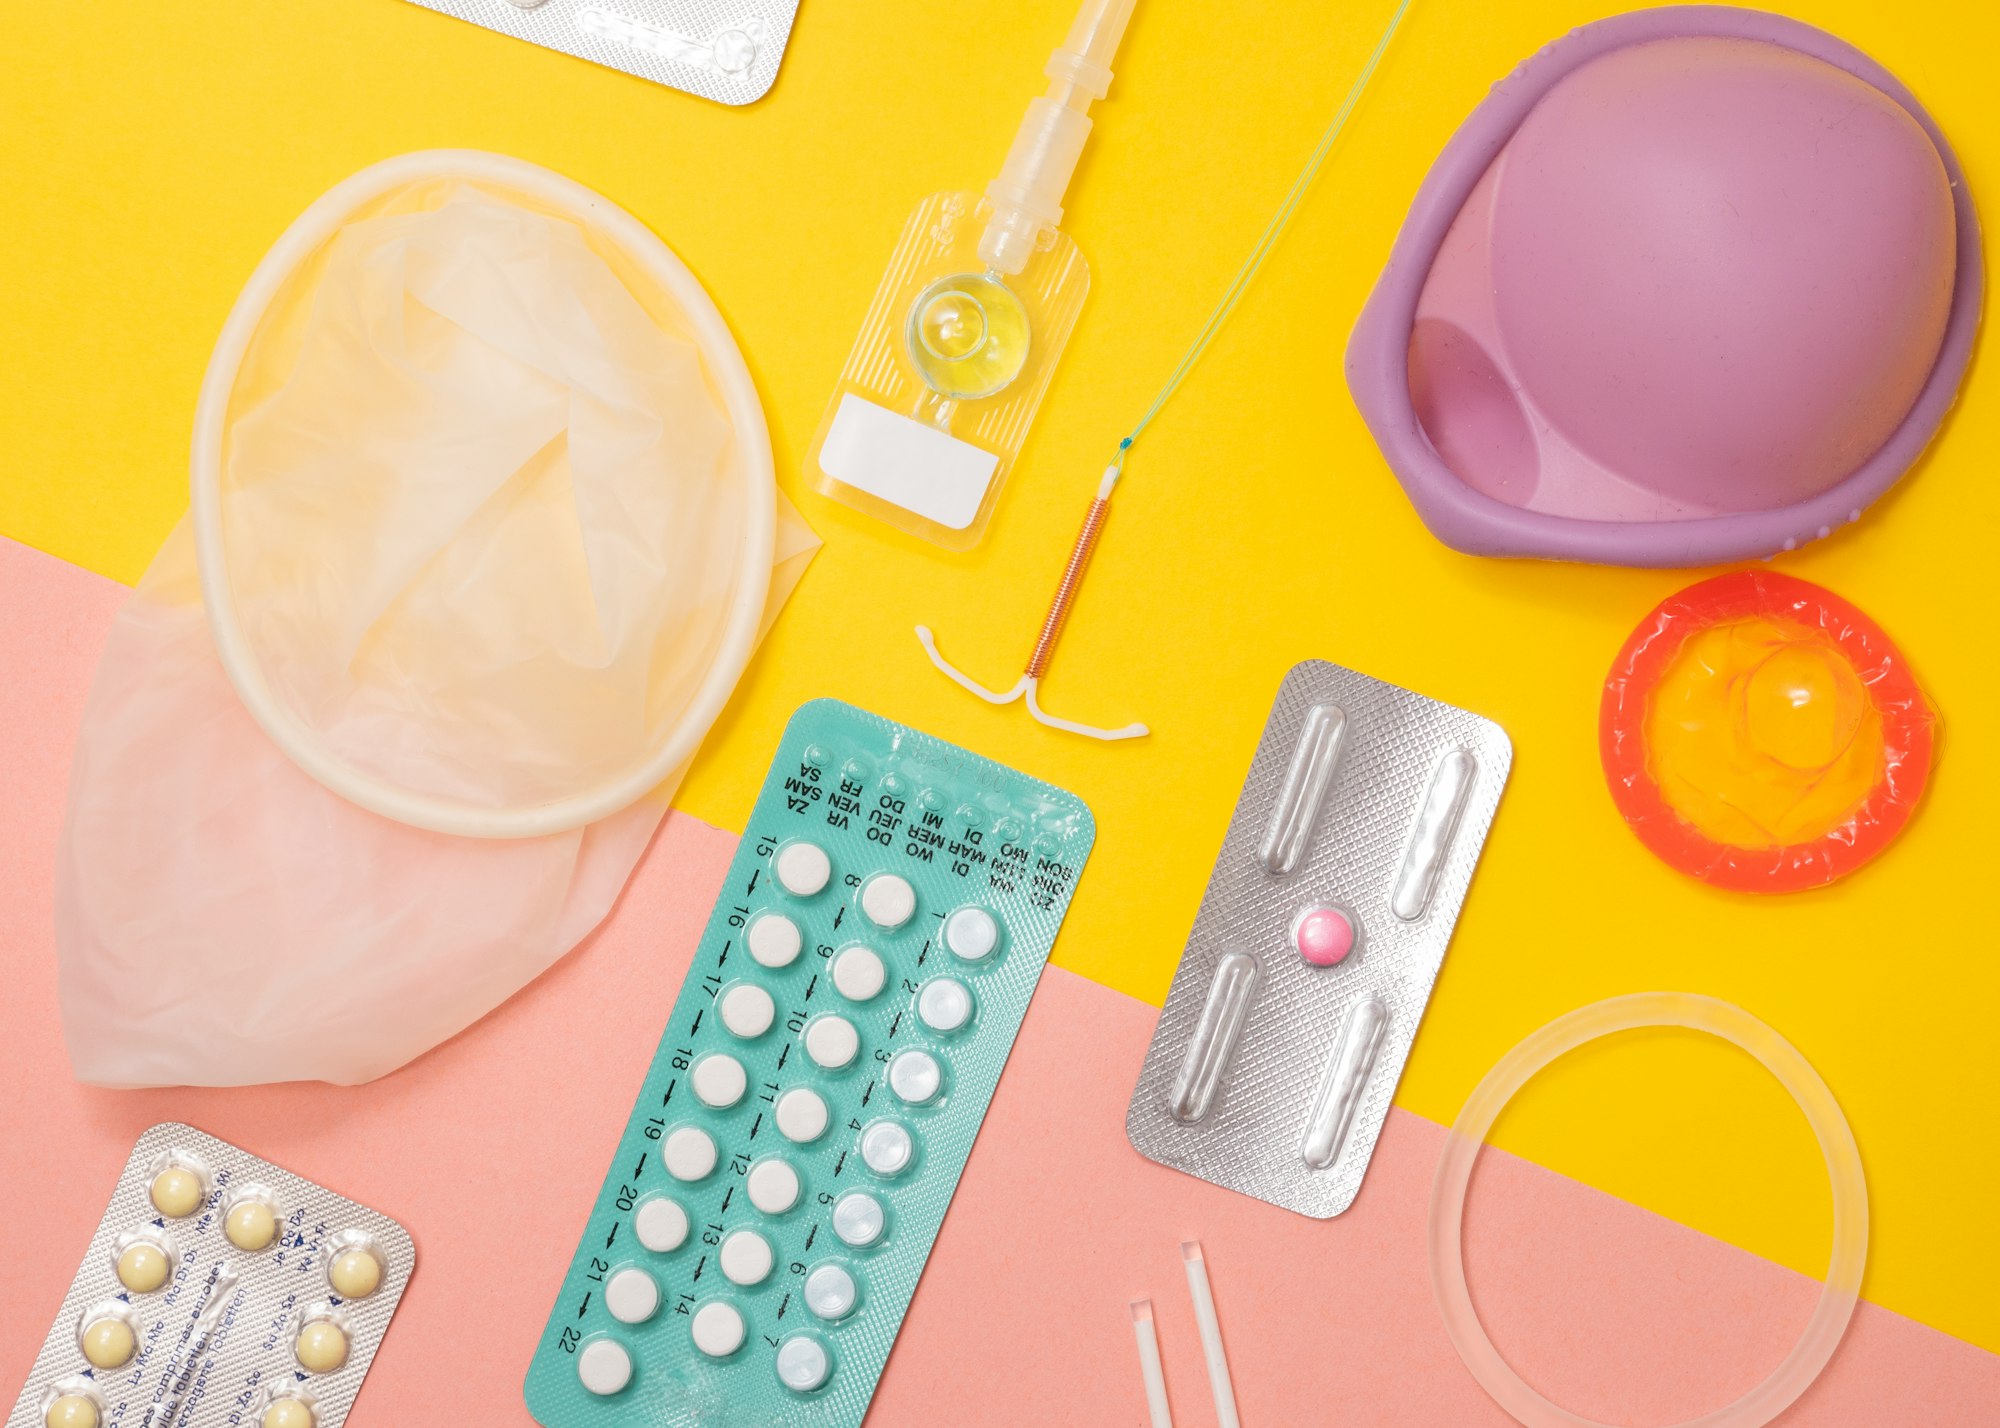 different types of contraception on a table such as oral contraceptive pills, condom, vaginal ring, IUD and more